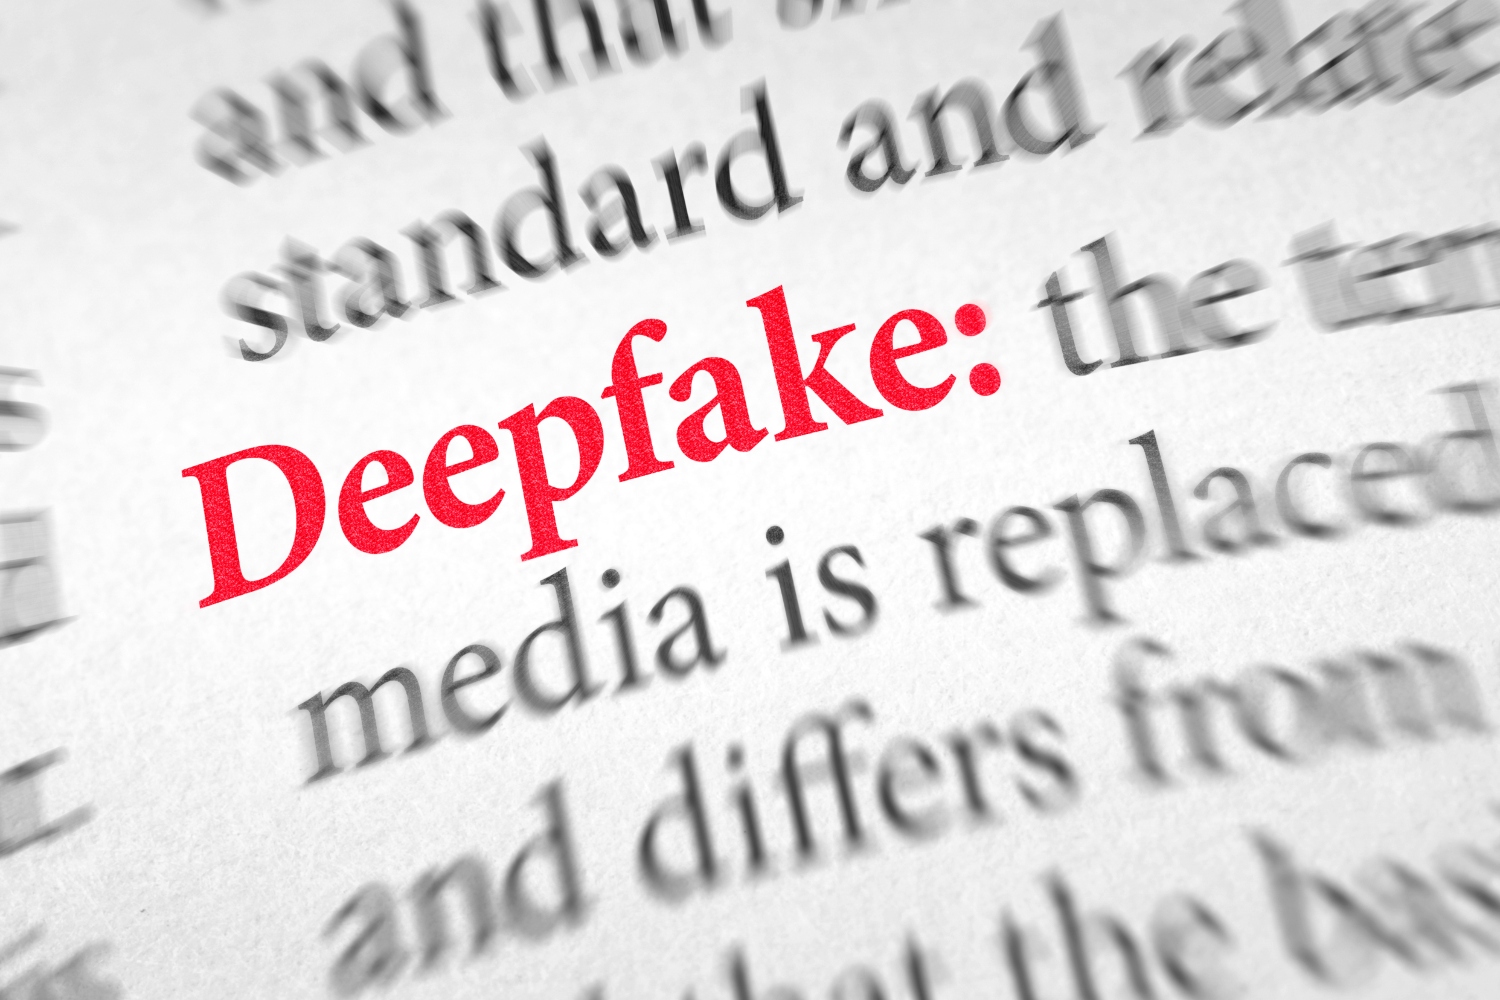 Definition of the word Deepfake in a dictionary - it's become much easier to use the tech to create some unsettling porn